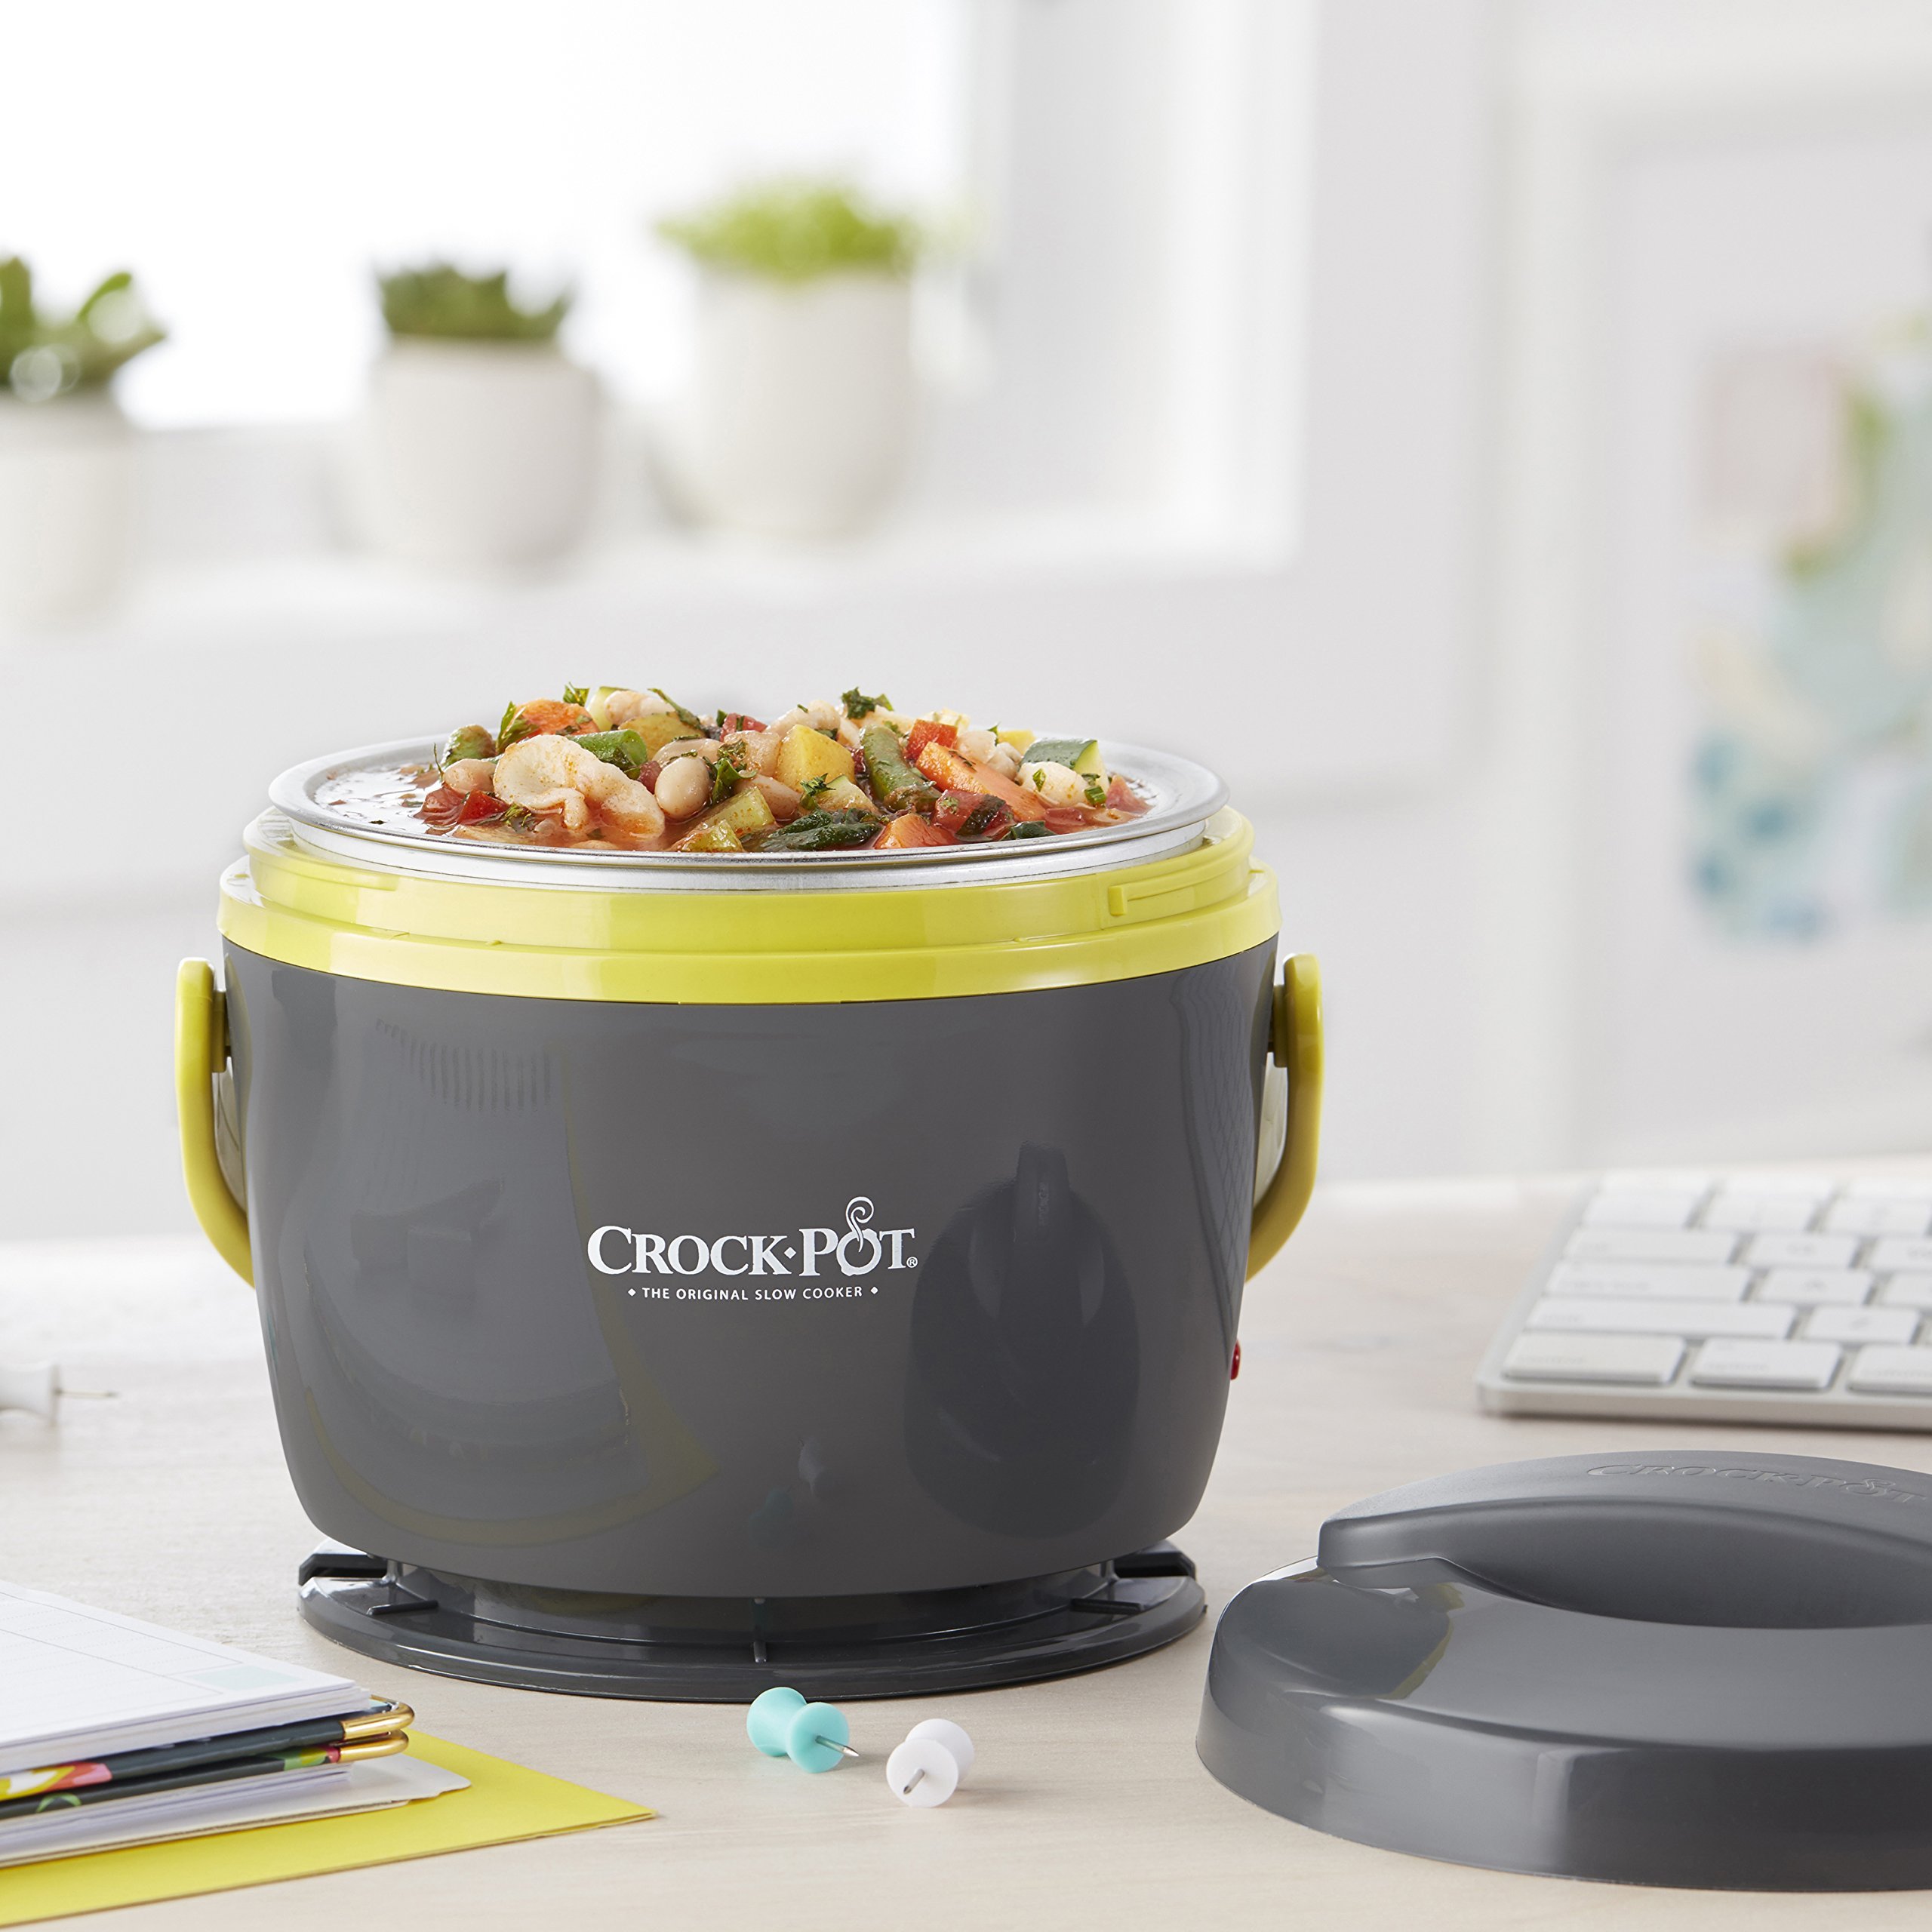 Electric Lunch Boxes: 5 Food Warmer Lunch Boxes to Tastily Reheat